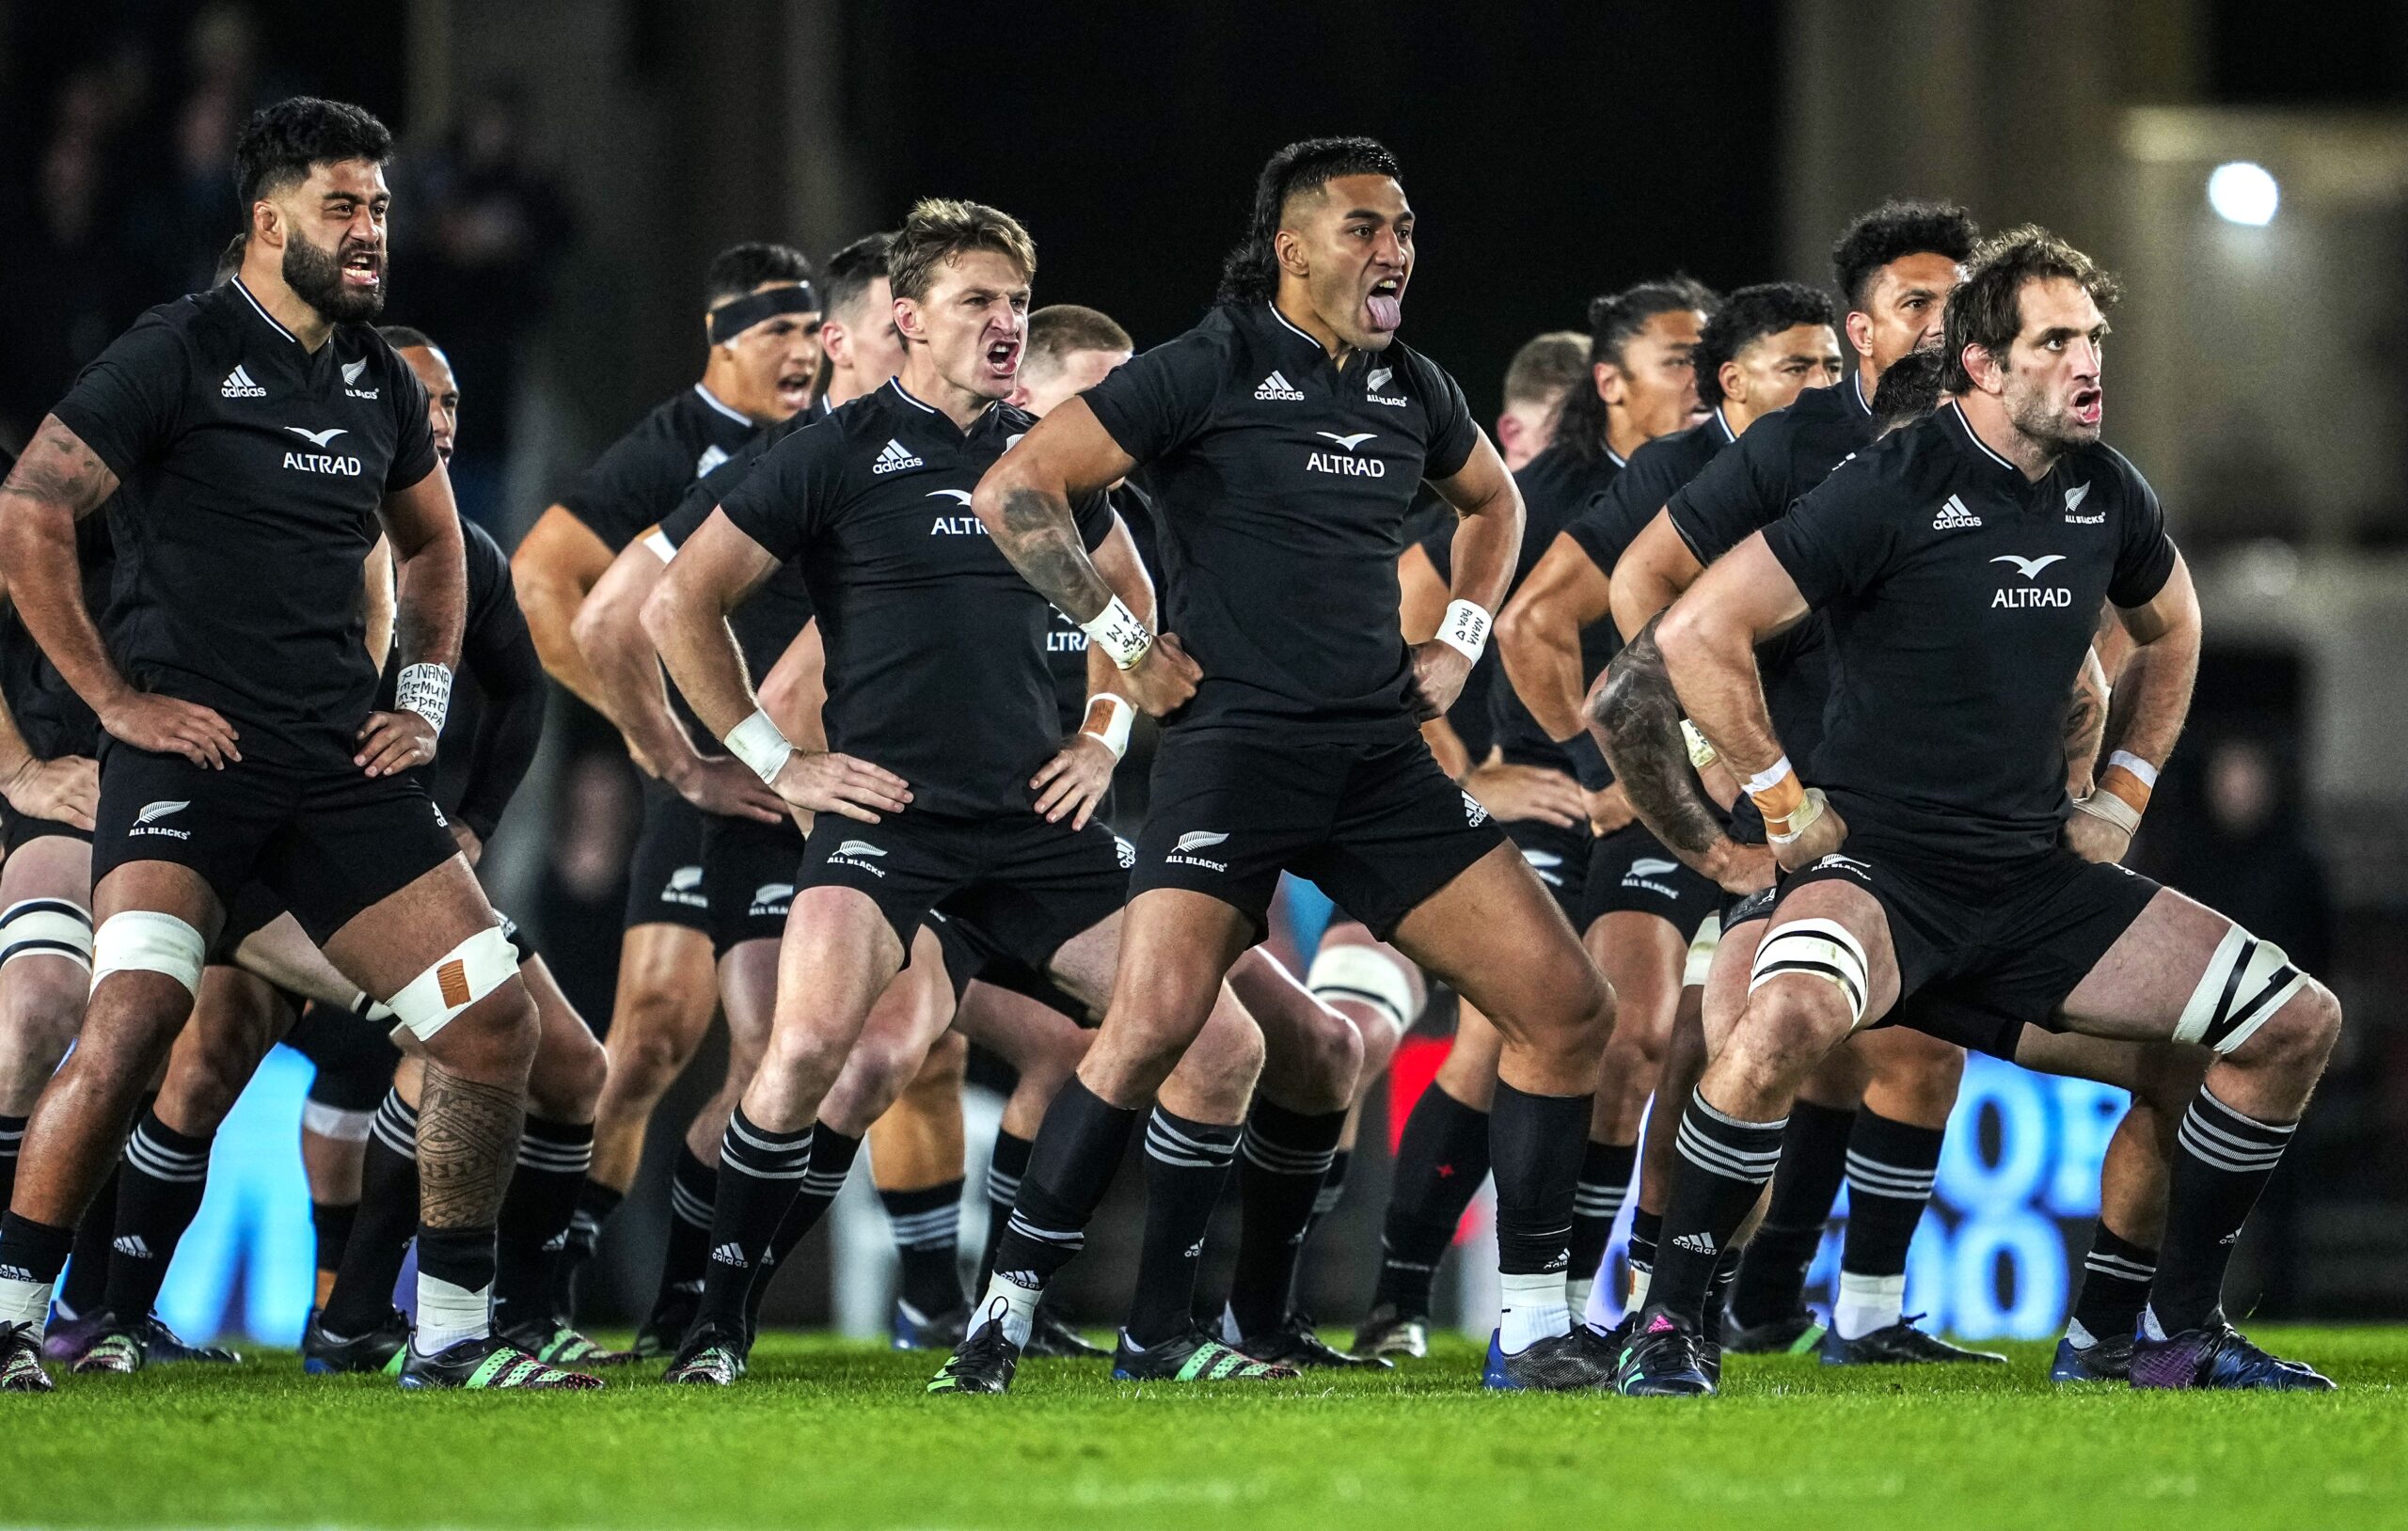 action press joins forces with SmartFrame to become the Official Photographer of New Zealand Rugby